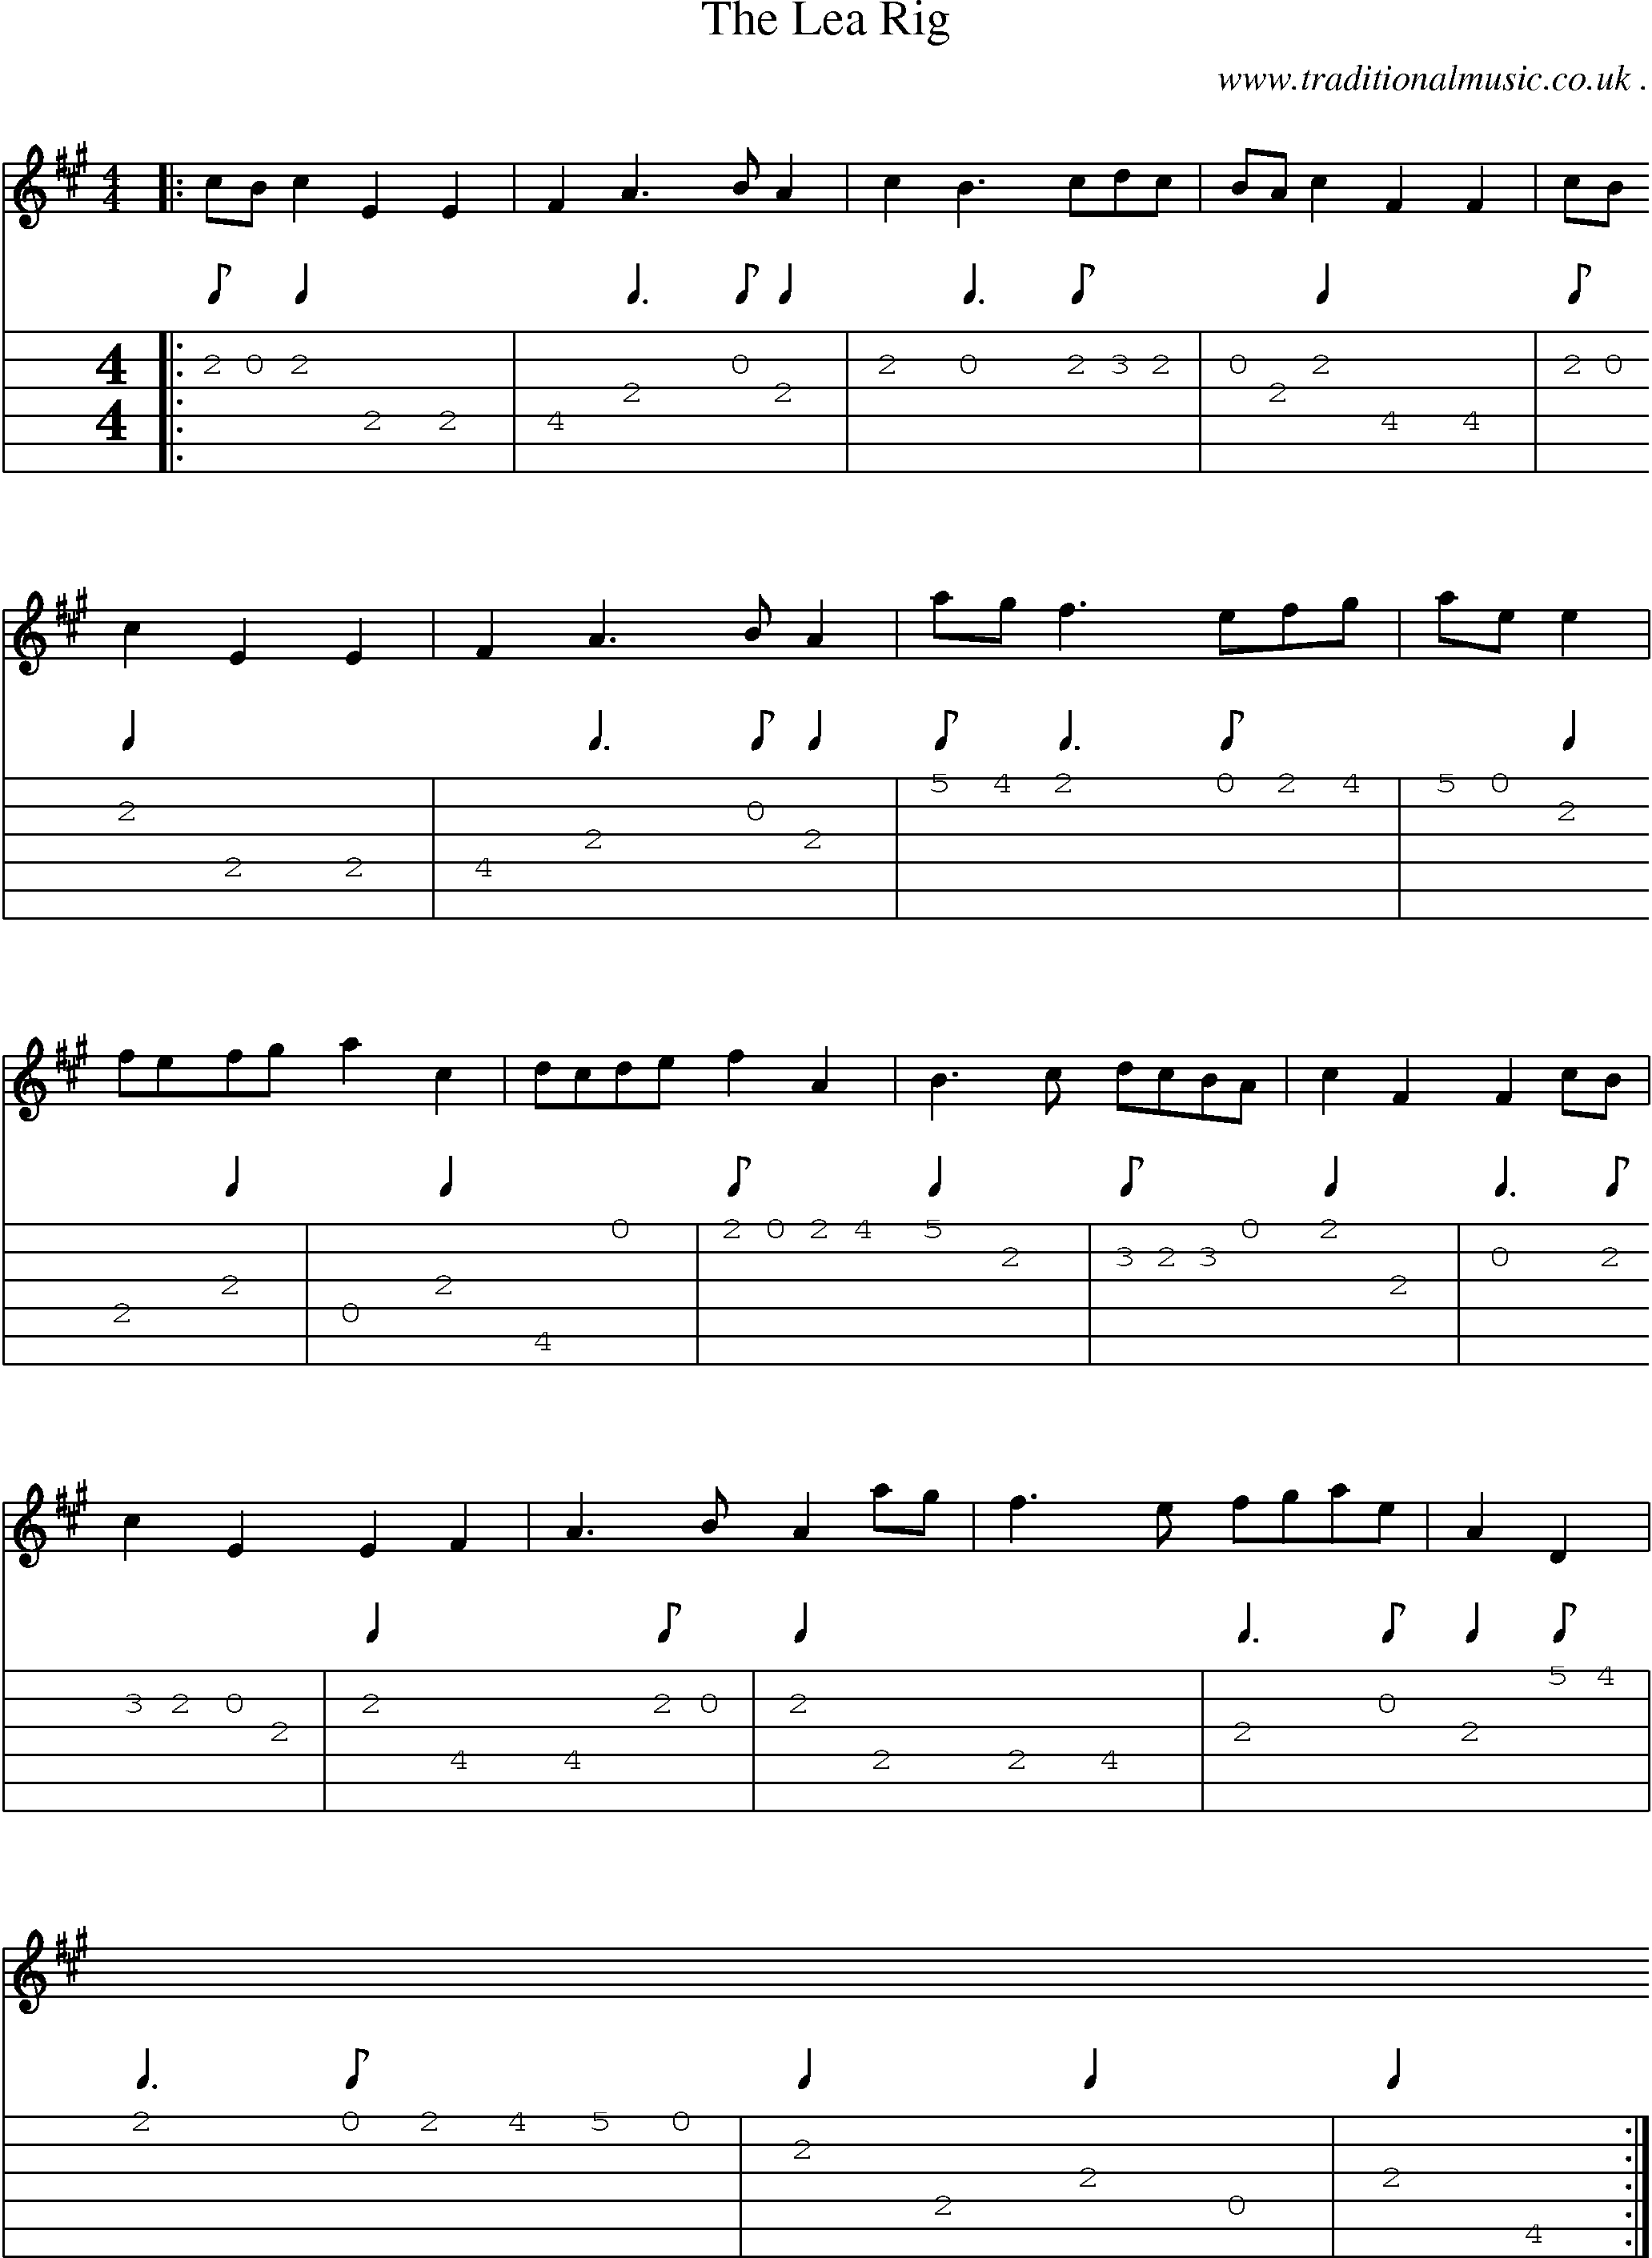 Sheet-Music and Guitar Tabs for The Lea Rig